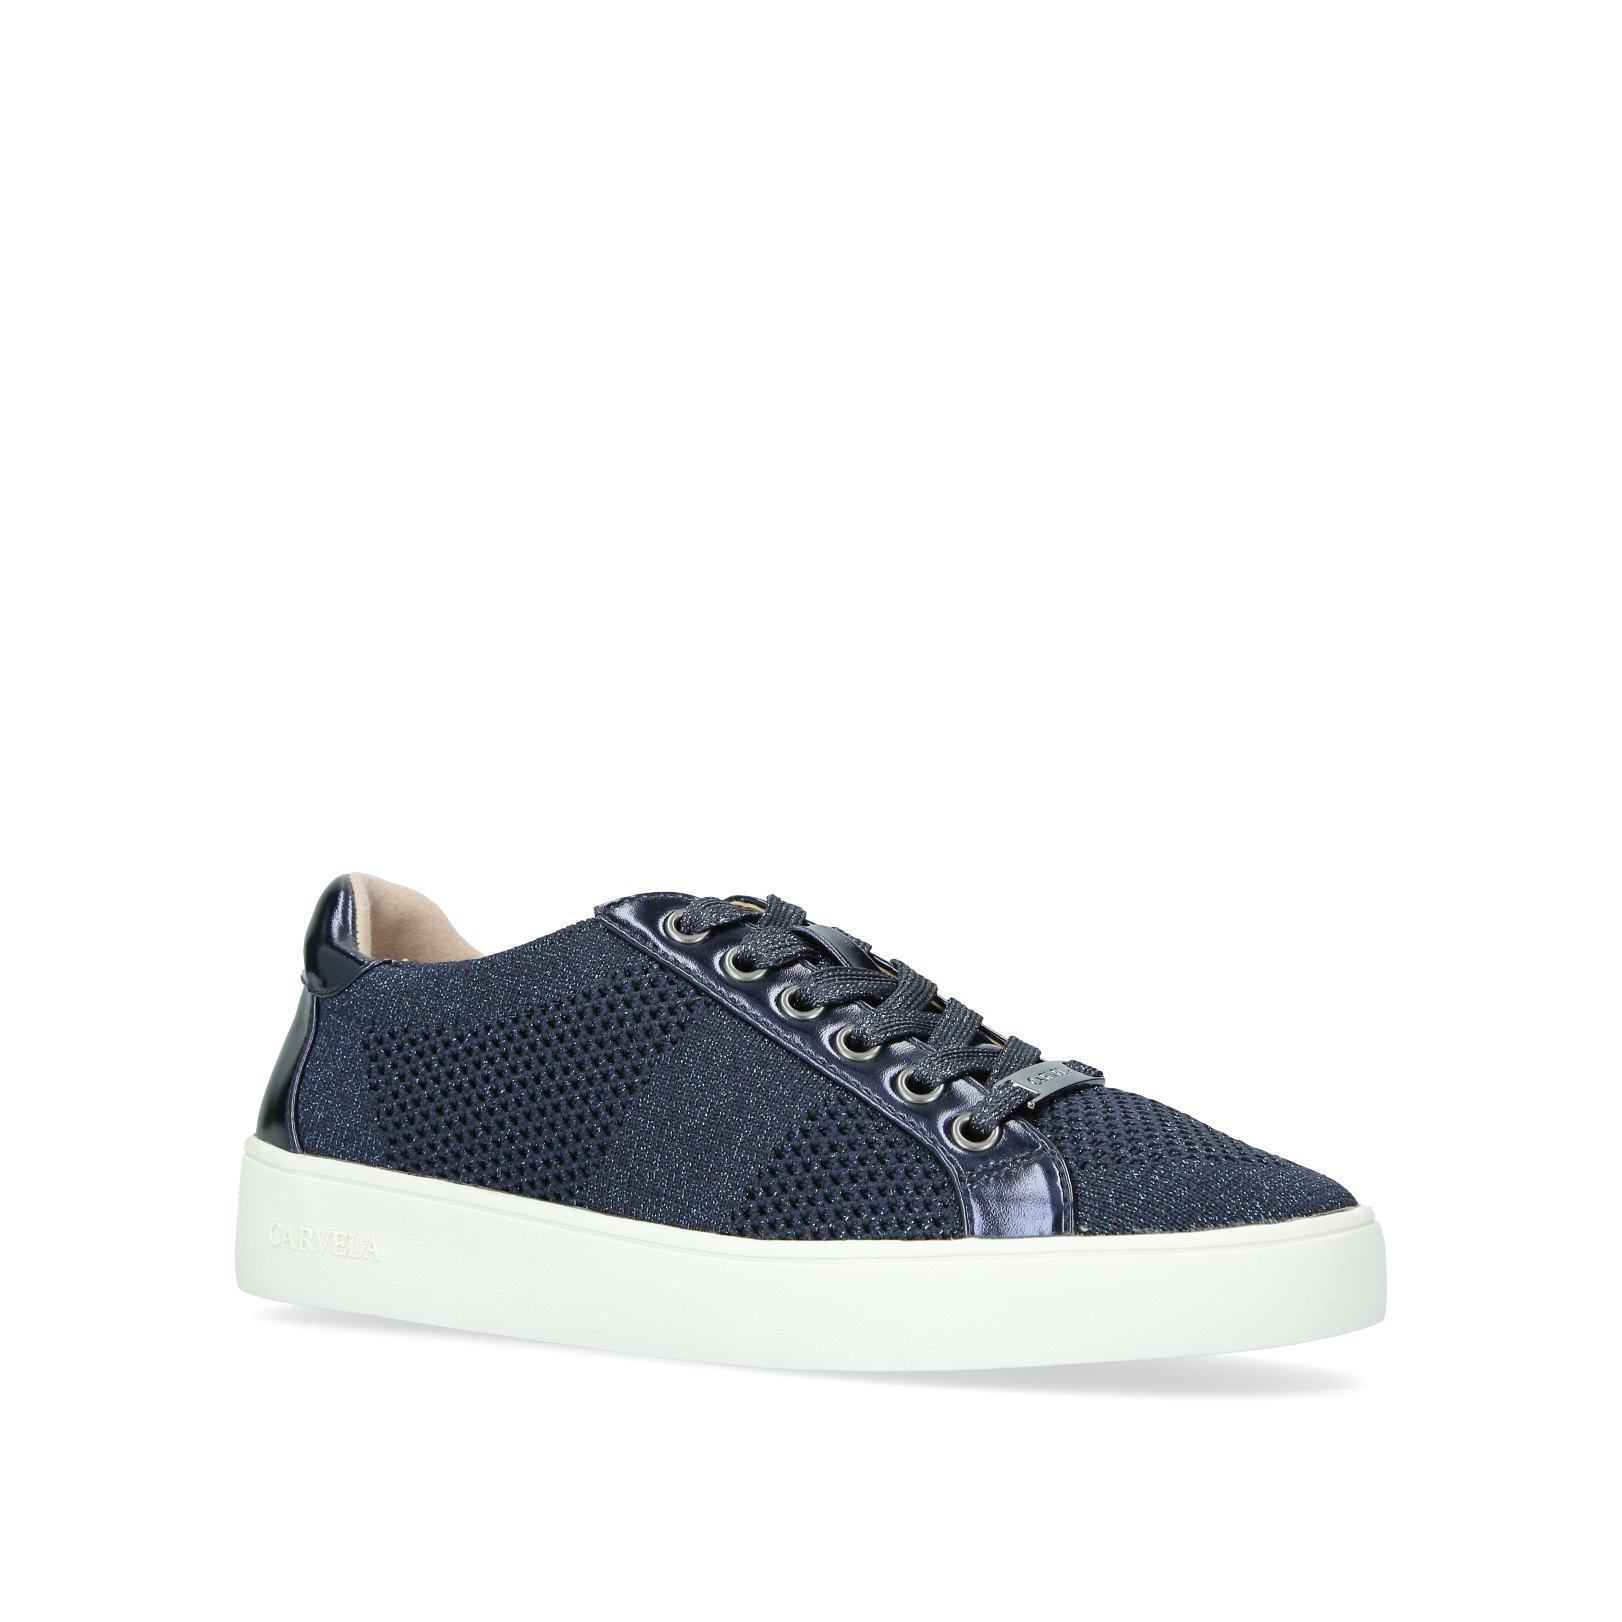 Carvela Kurt Geiger Navy 'jealousy' Lace Up Trainers in Blue - Lyst